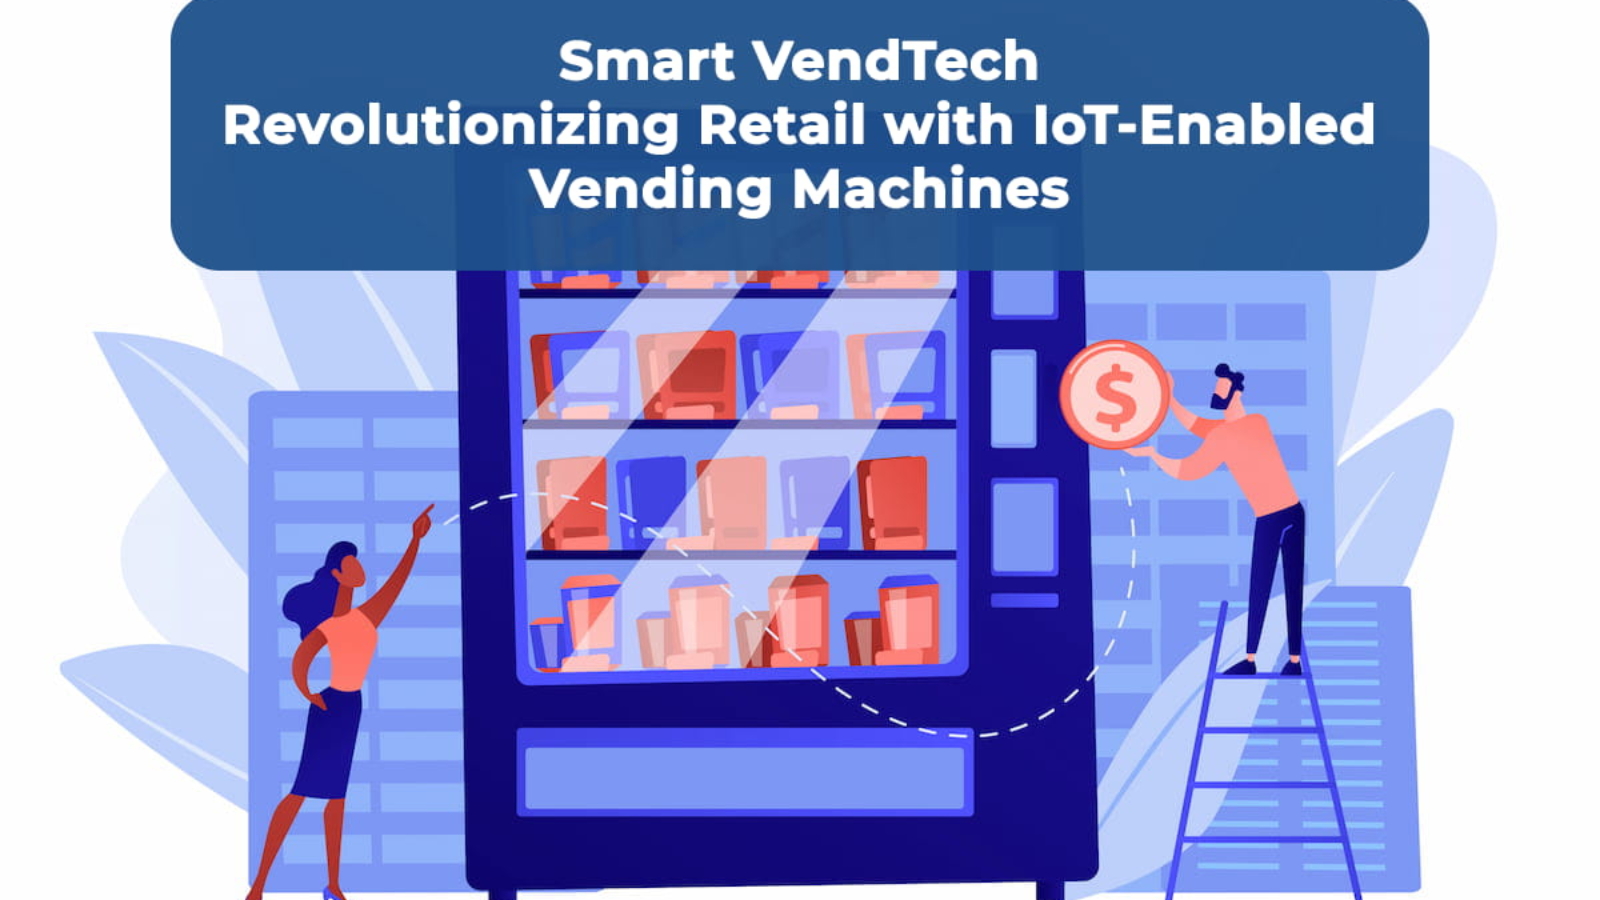 Smart VendTech: Revolutionizing Retail with IoT-Enabled Vending Machines